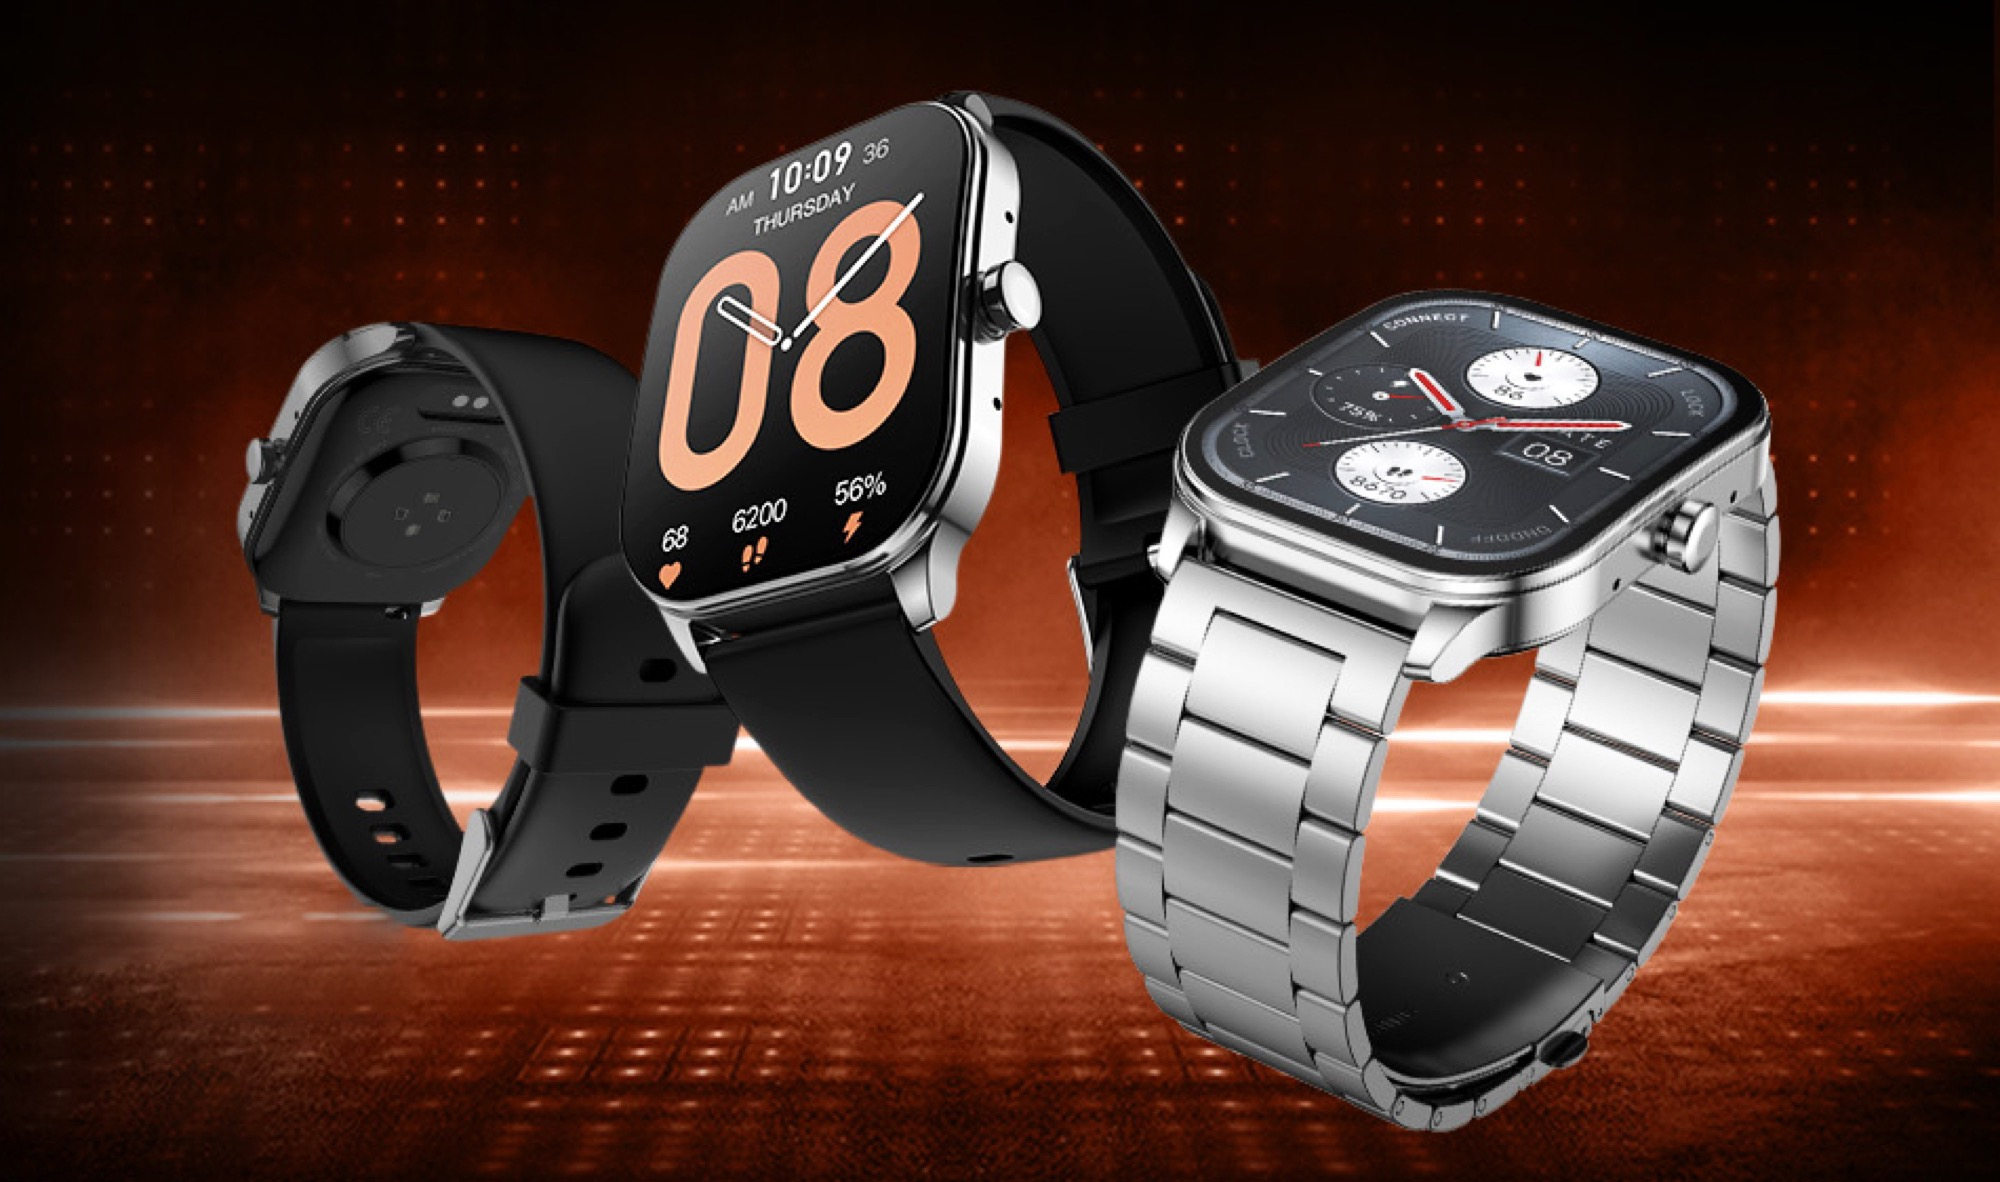 Coming Soon: Amazfit Pop 3S - 1.96 AMOLED Display Smart Watch with Bl